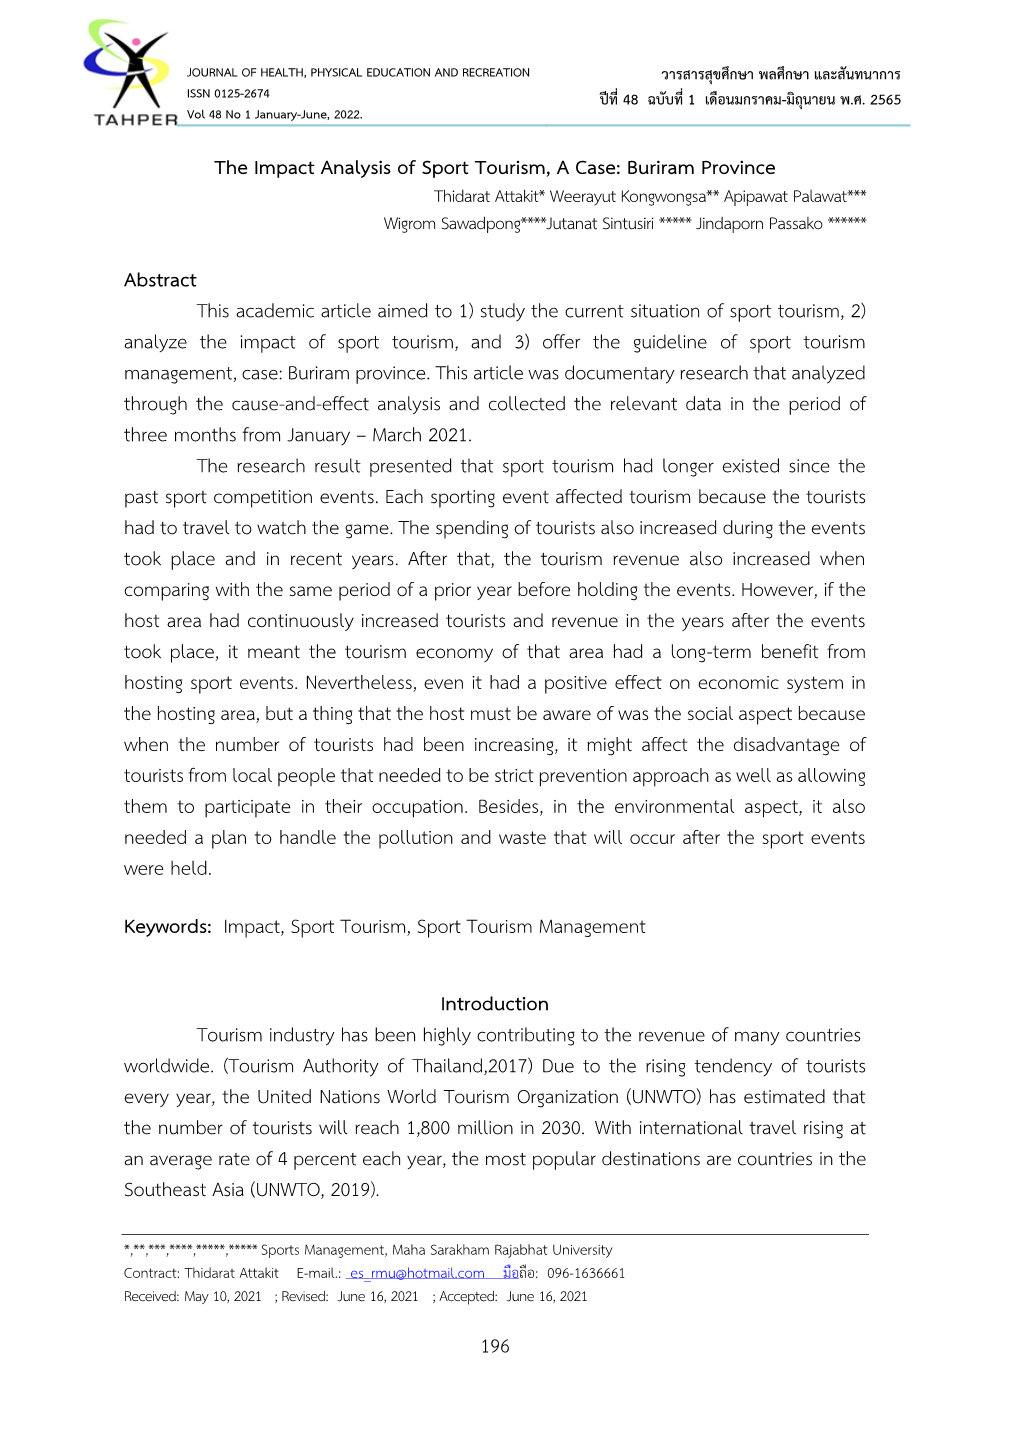 196 the Impact Analysis of Sport Tourism, a Case: Buriram Province Abstract This Academic Article Aimed to 1) Study The